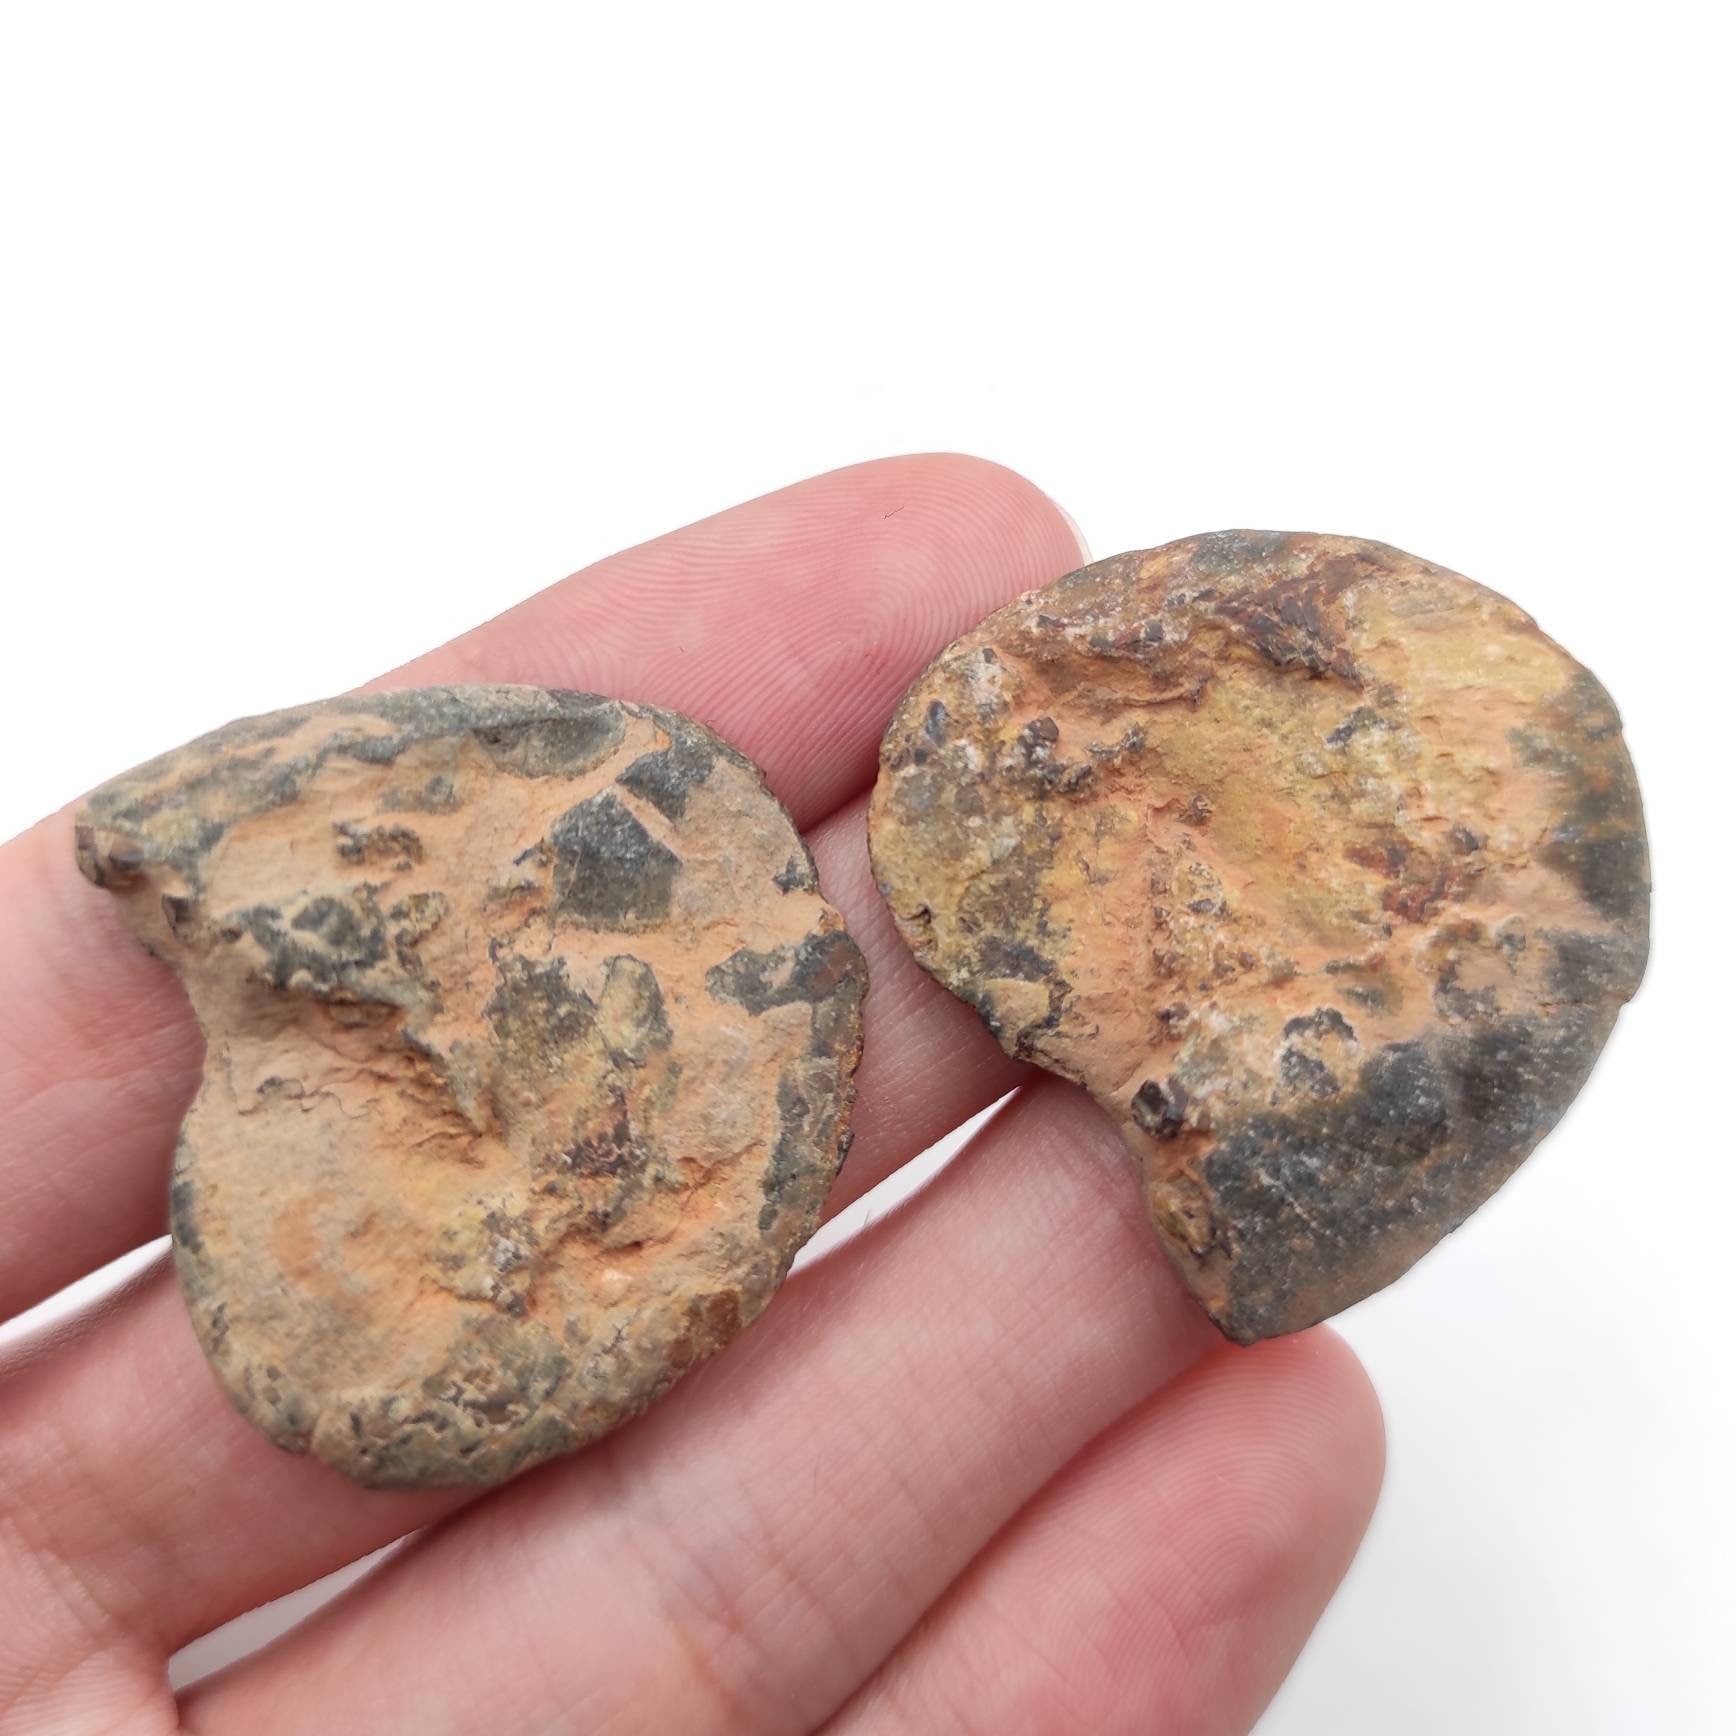 15g Unique Pair of Ammonite Fossils - Over 66 Million Years Old - Polished Ammonite Fossil from Sahara Desert, Morocco - Genuine Fossils